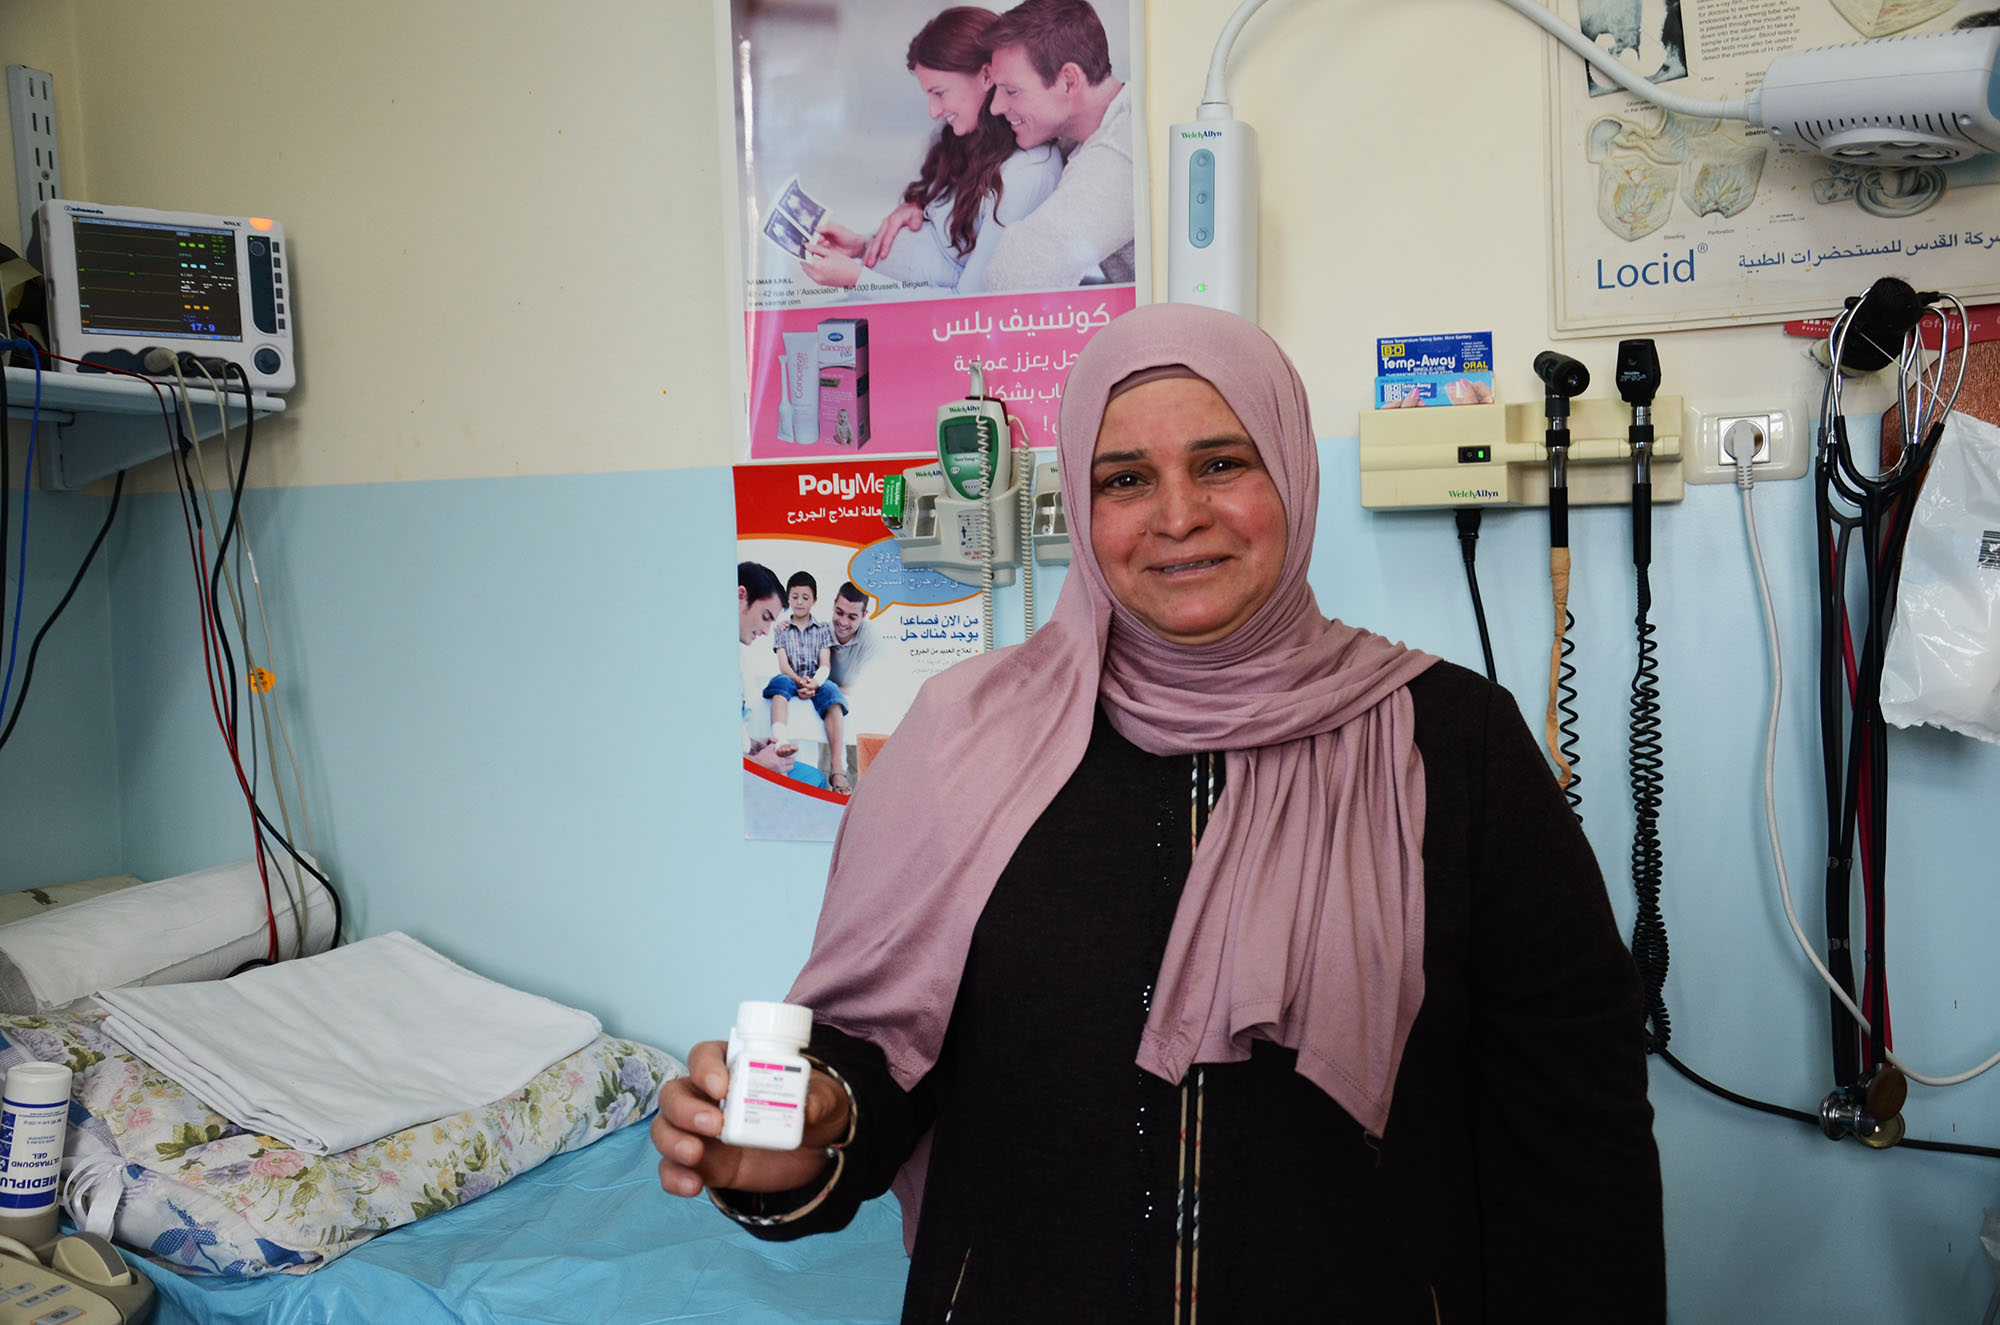 Fadya is relieved to find an effective medicine to manage her diabetes at the clinic.